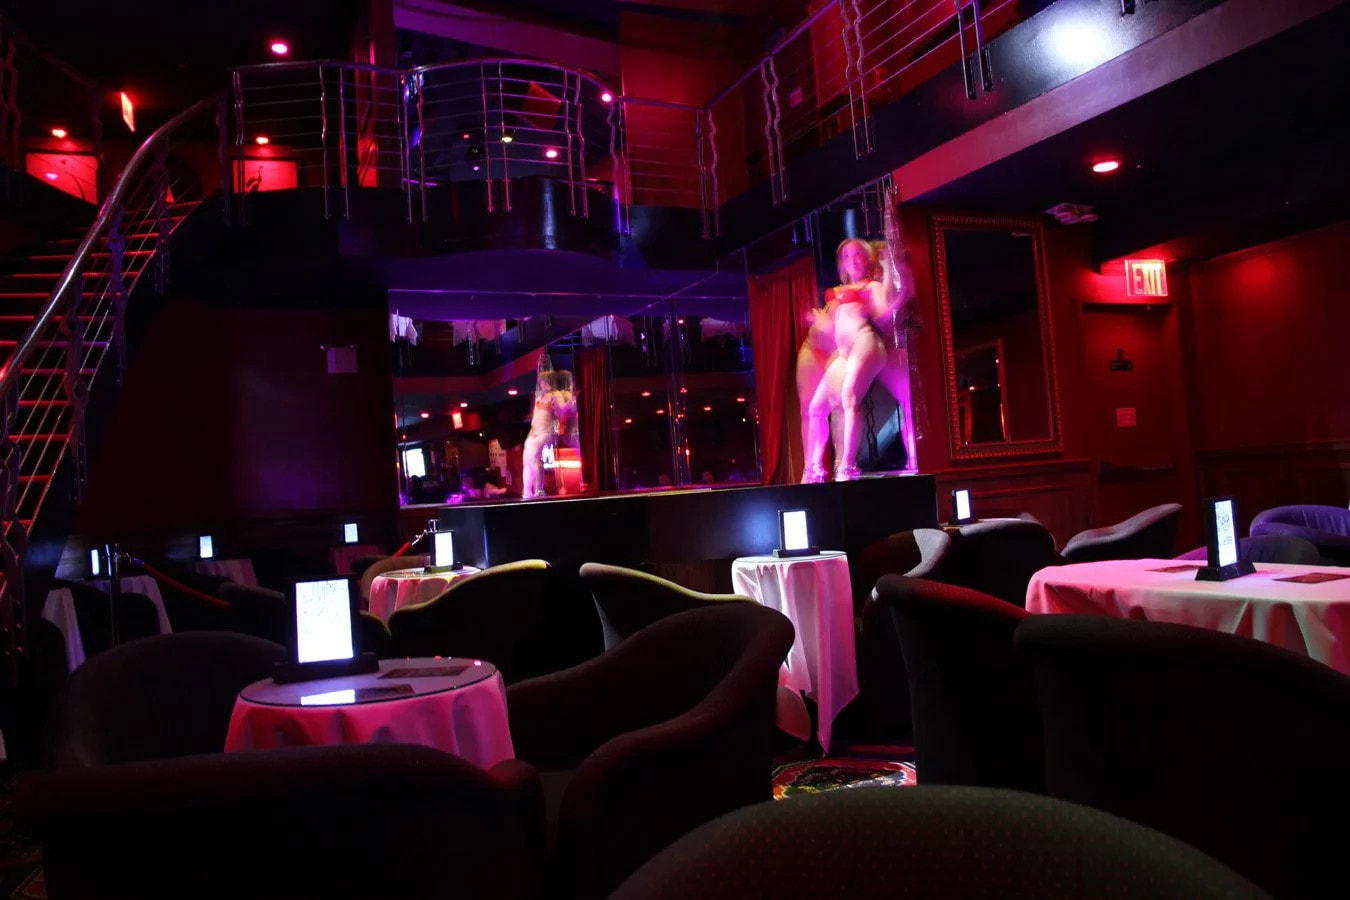 Strip clubs in the united states